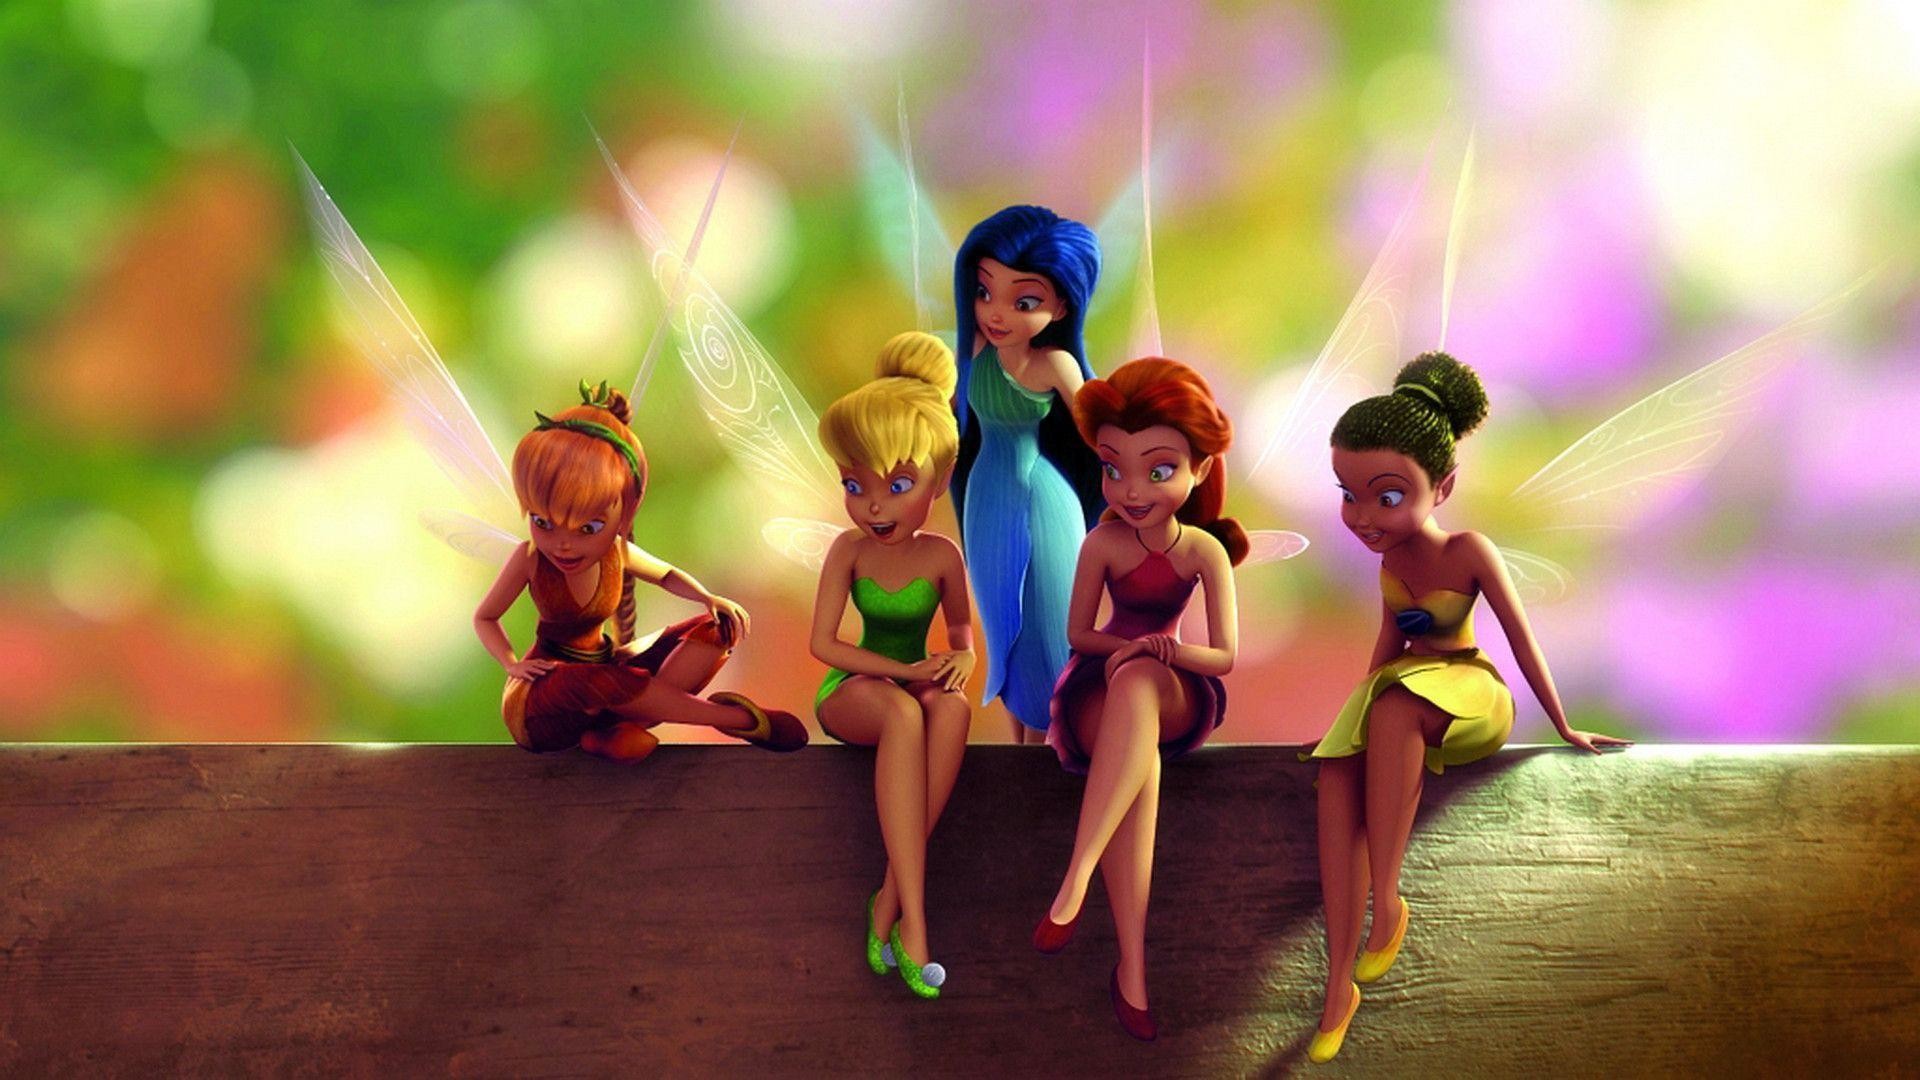 1920x1080 Tinkerbell wallpapers | HD Wallpapers Pictures